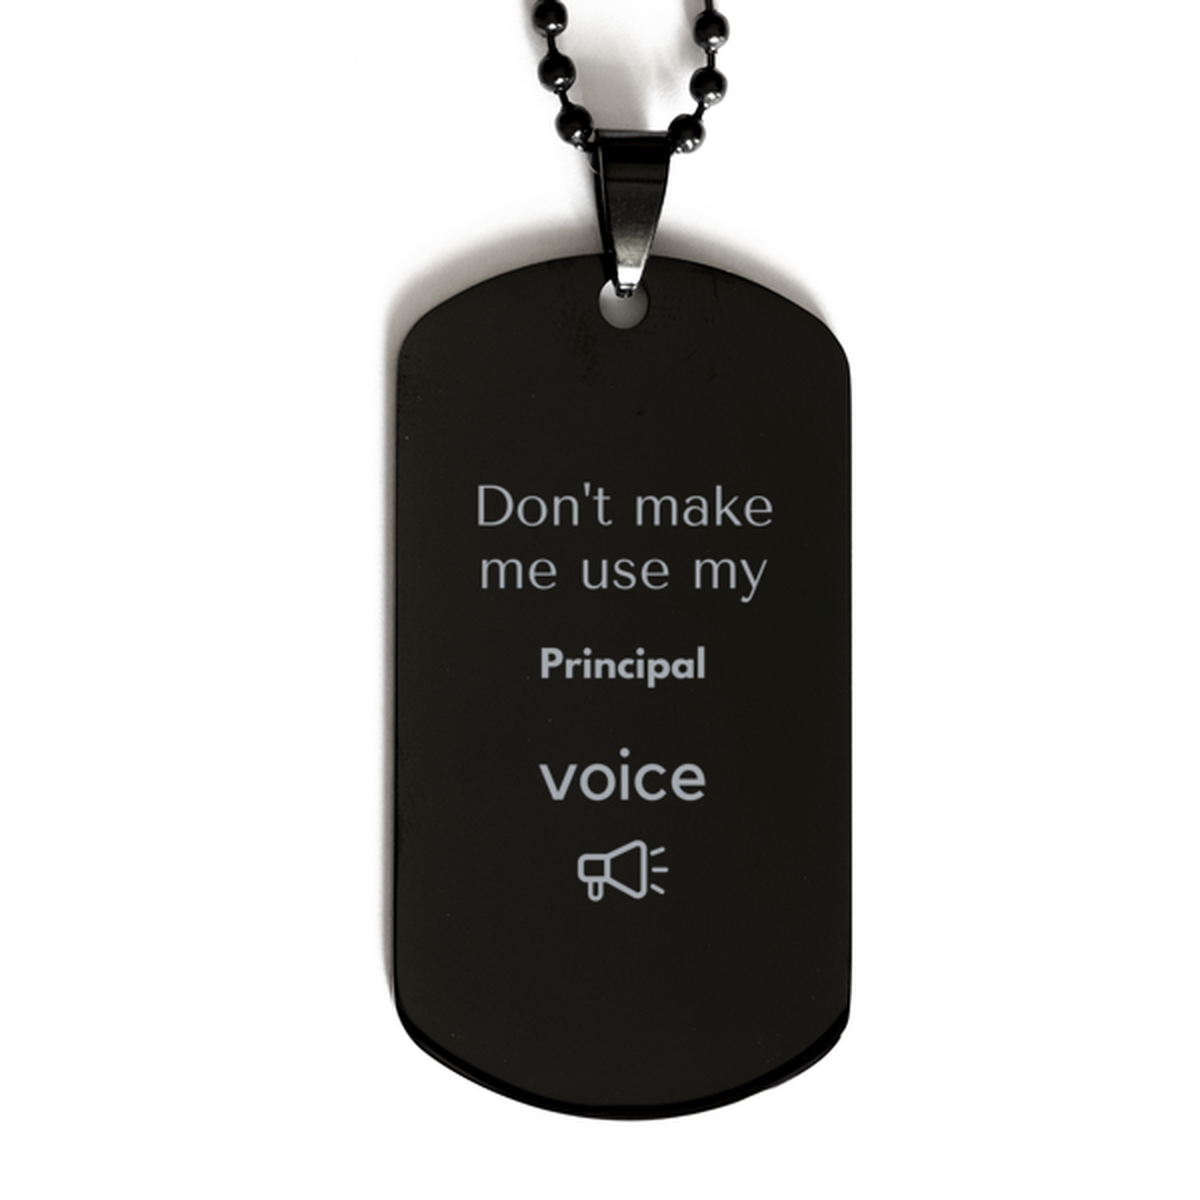 Don't make me use my Principal voice, Sarcasm Principal Gifts, Christmas Principal Black Dog Tag Birthday Unique Gifts For Principal Coworkers, Men, Women, Colleague, Friends